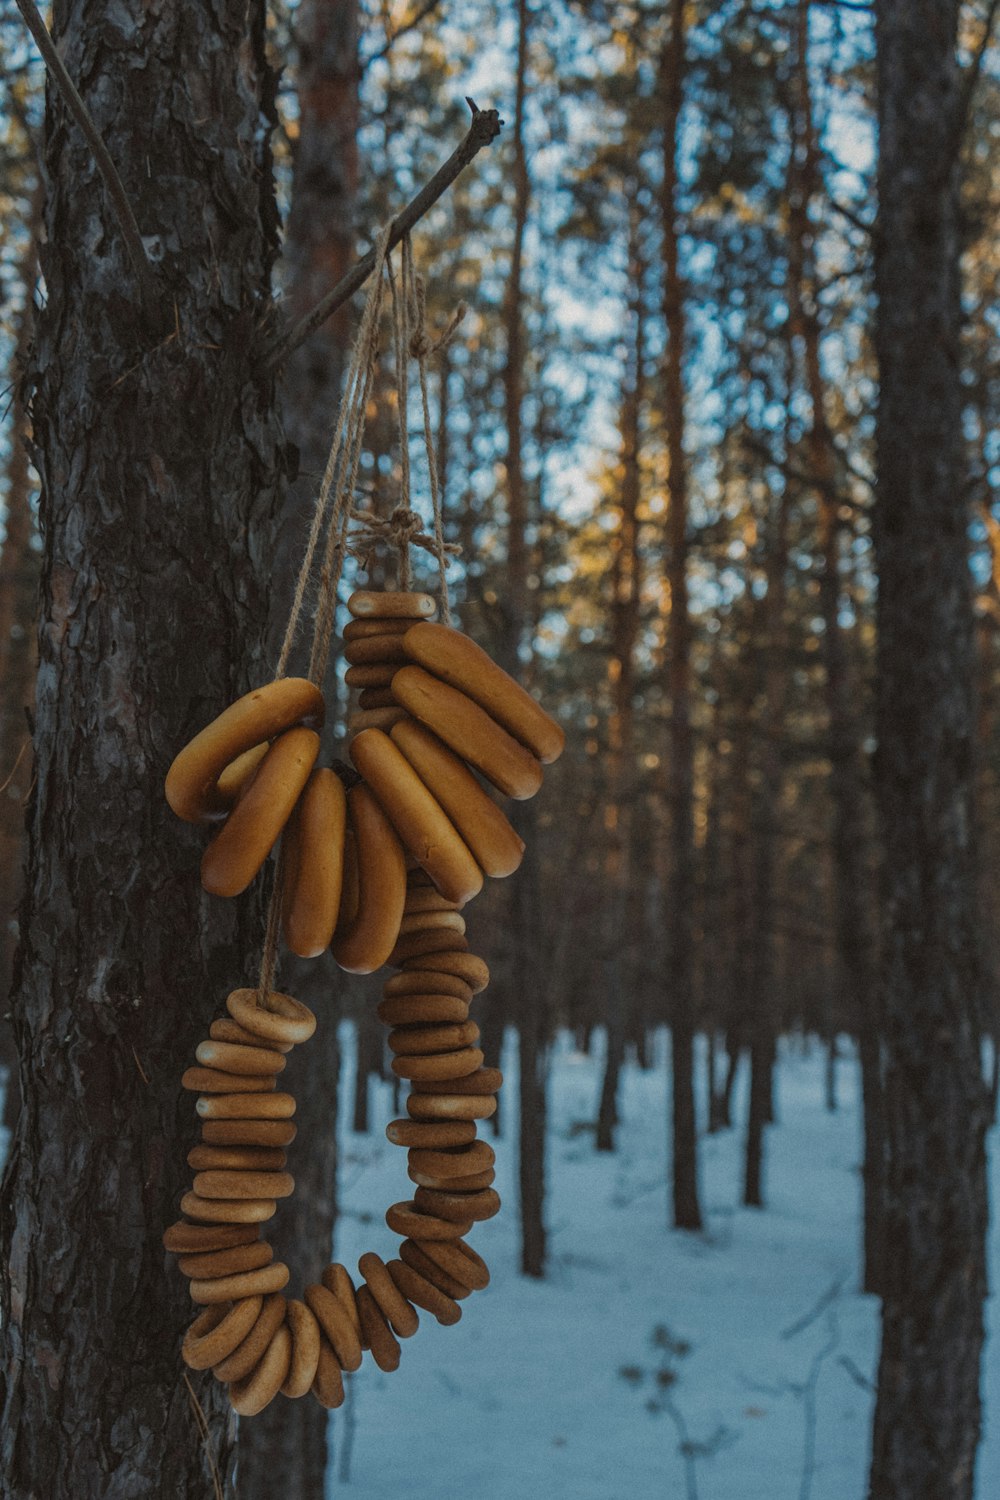 a bunch of bananas hanging from a tree